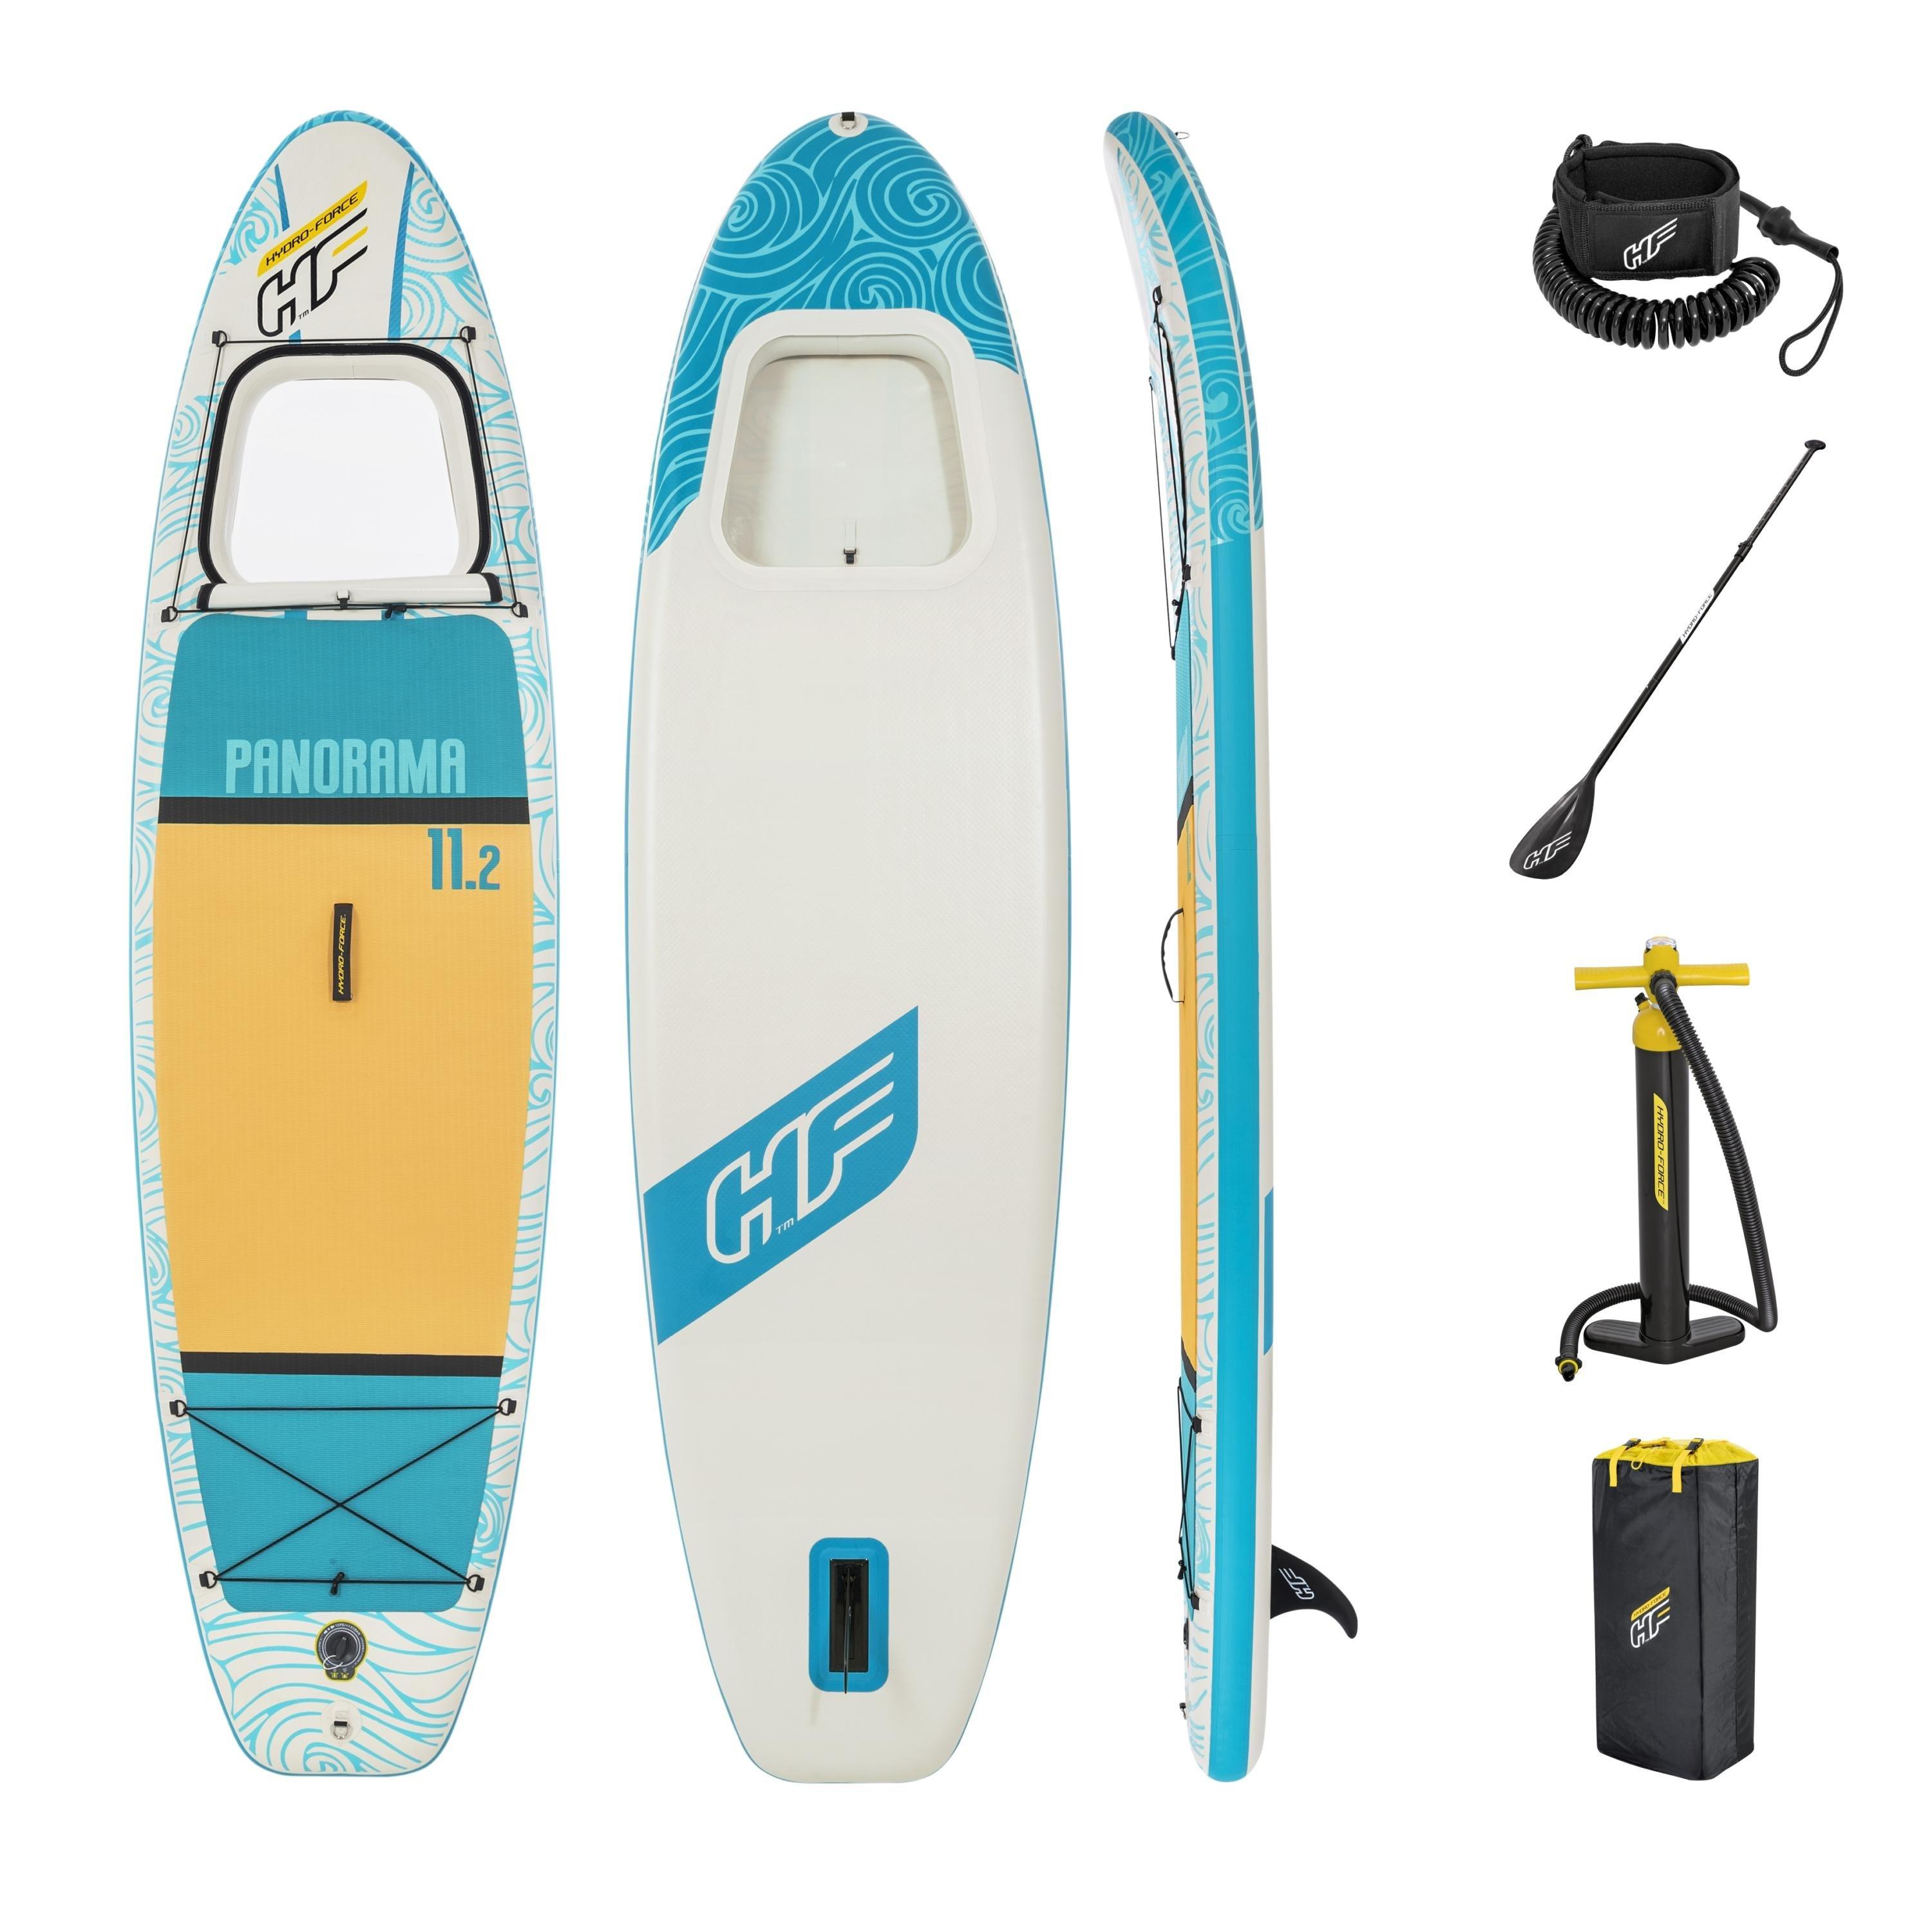 Hydro-Force Panorama Inflatable Stand-Up Paddleboard Set 11Ft 2|